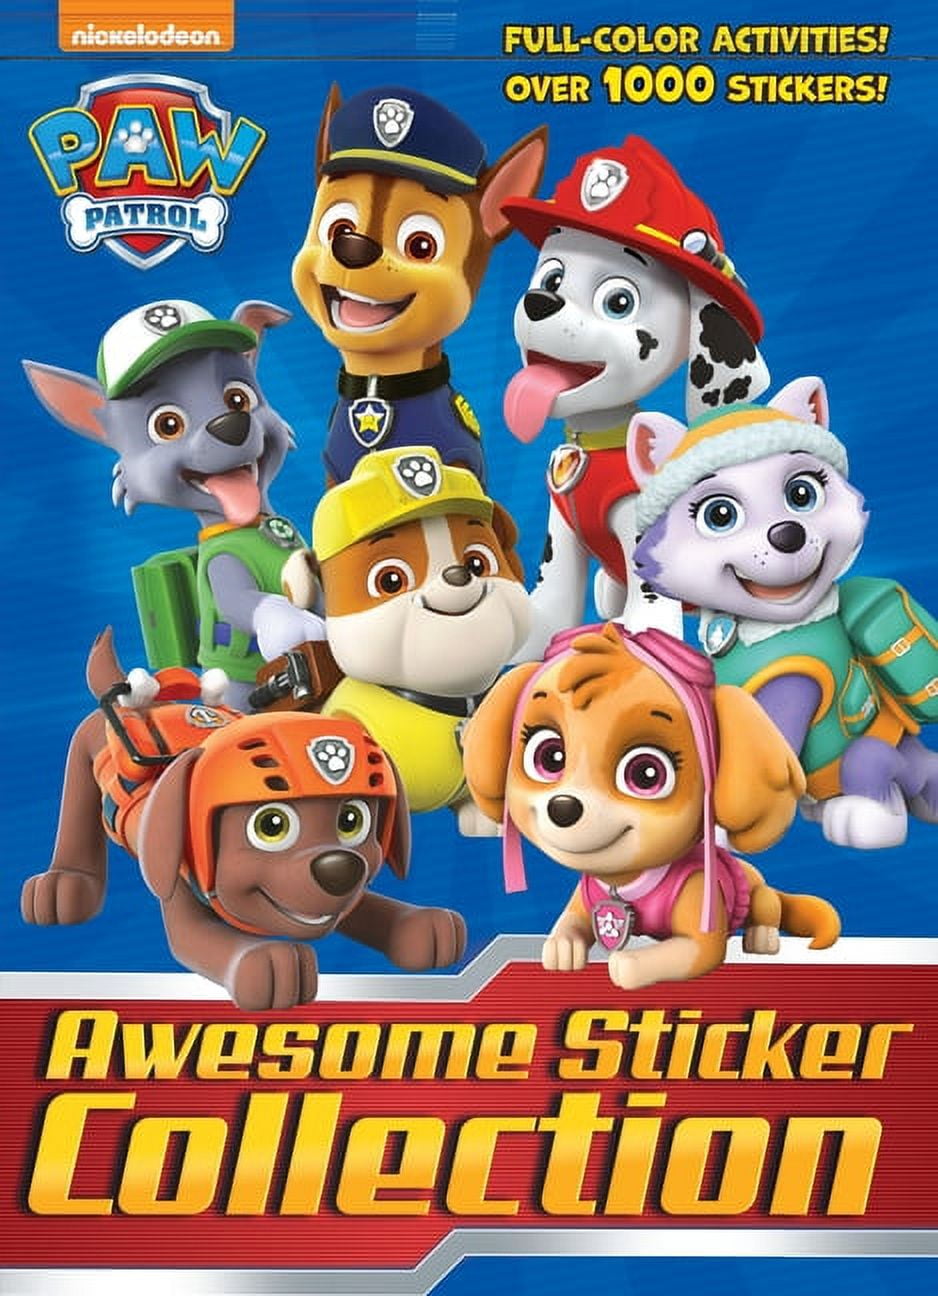  Paw patrol stick & color : AA.VV: Everything Else